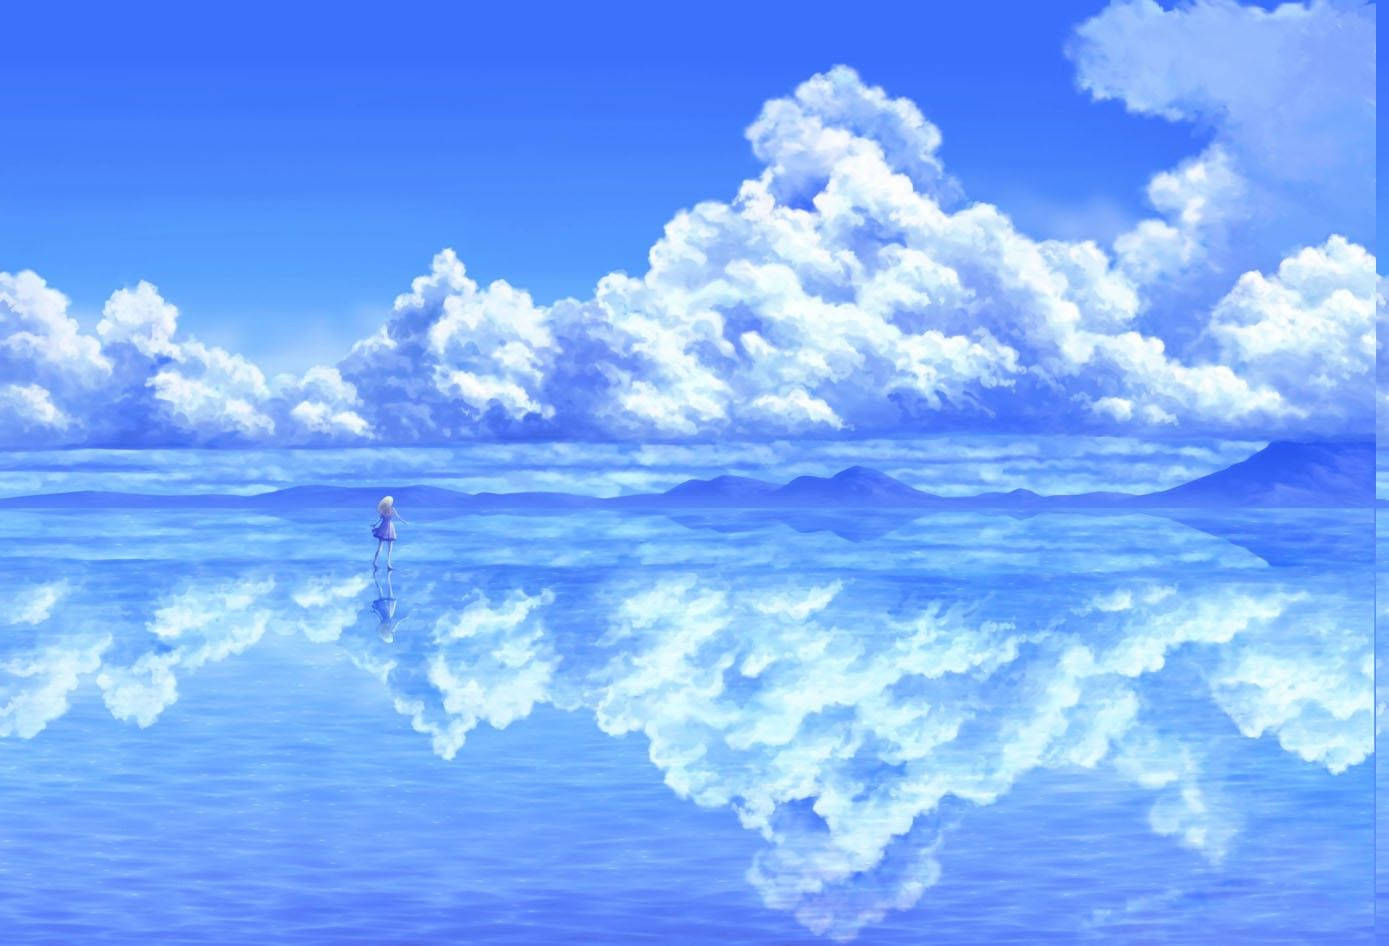 Anime Landscape Sea Of Clouds Background